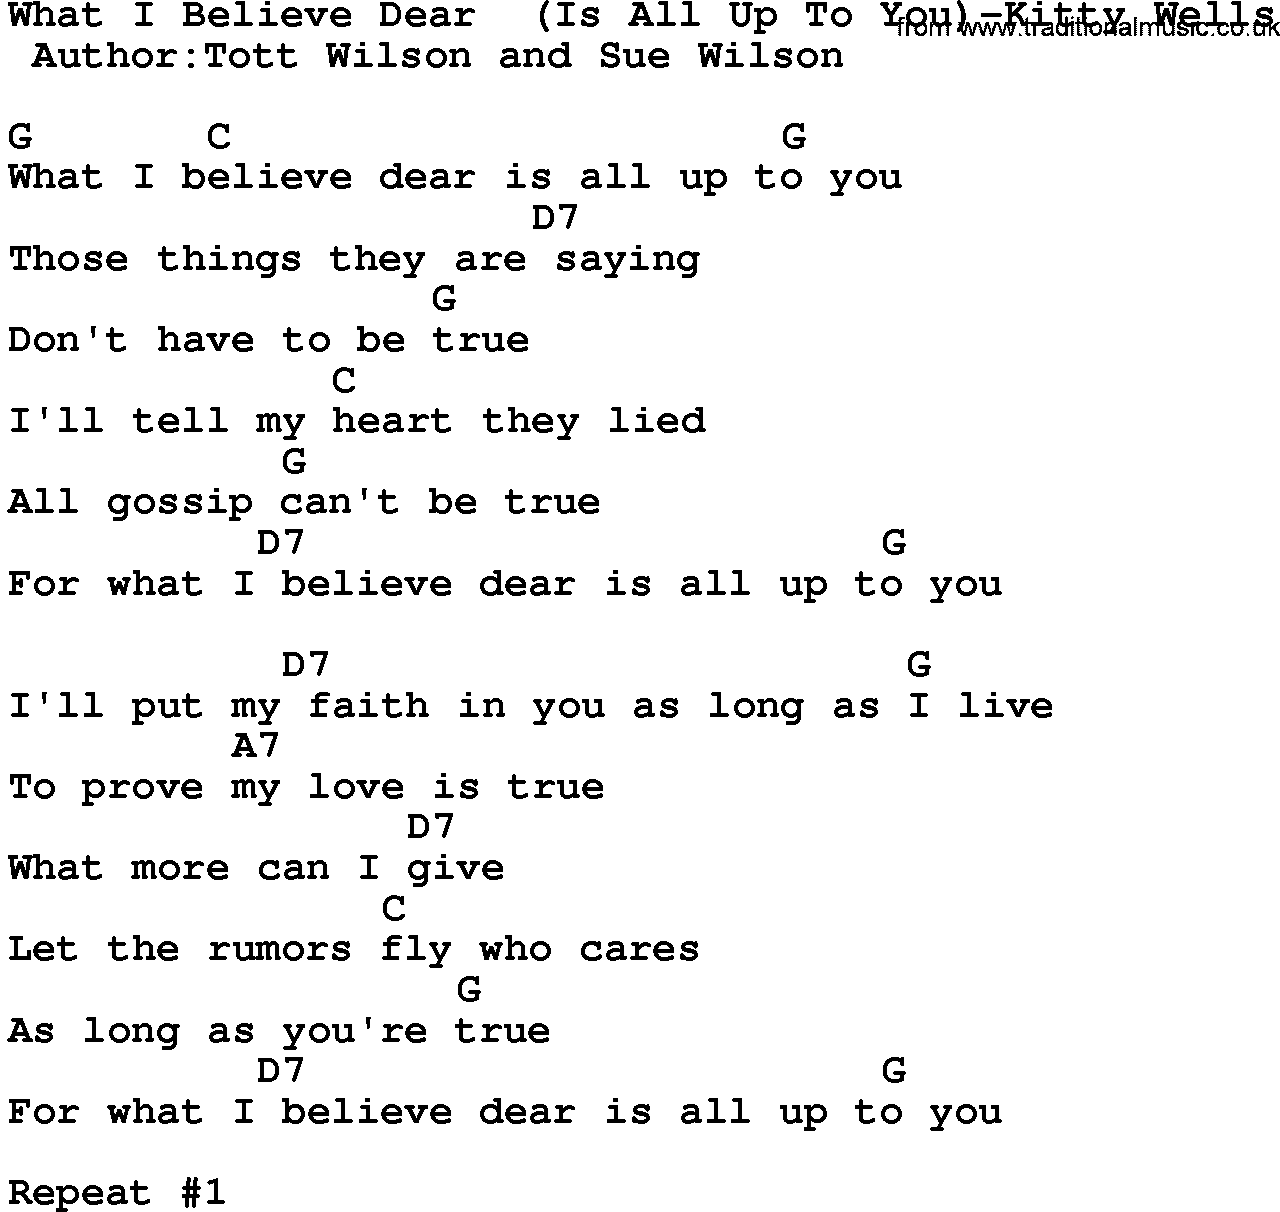 Country music song: What I Believe Dear(Is All Up To You)-Kitty Wells lyrics and chords